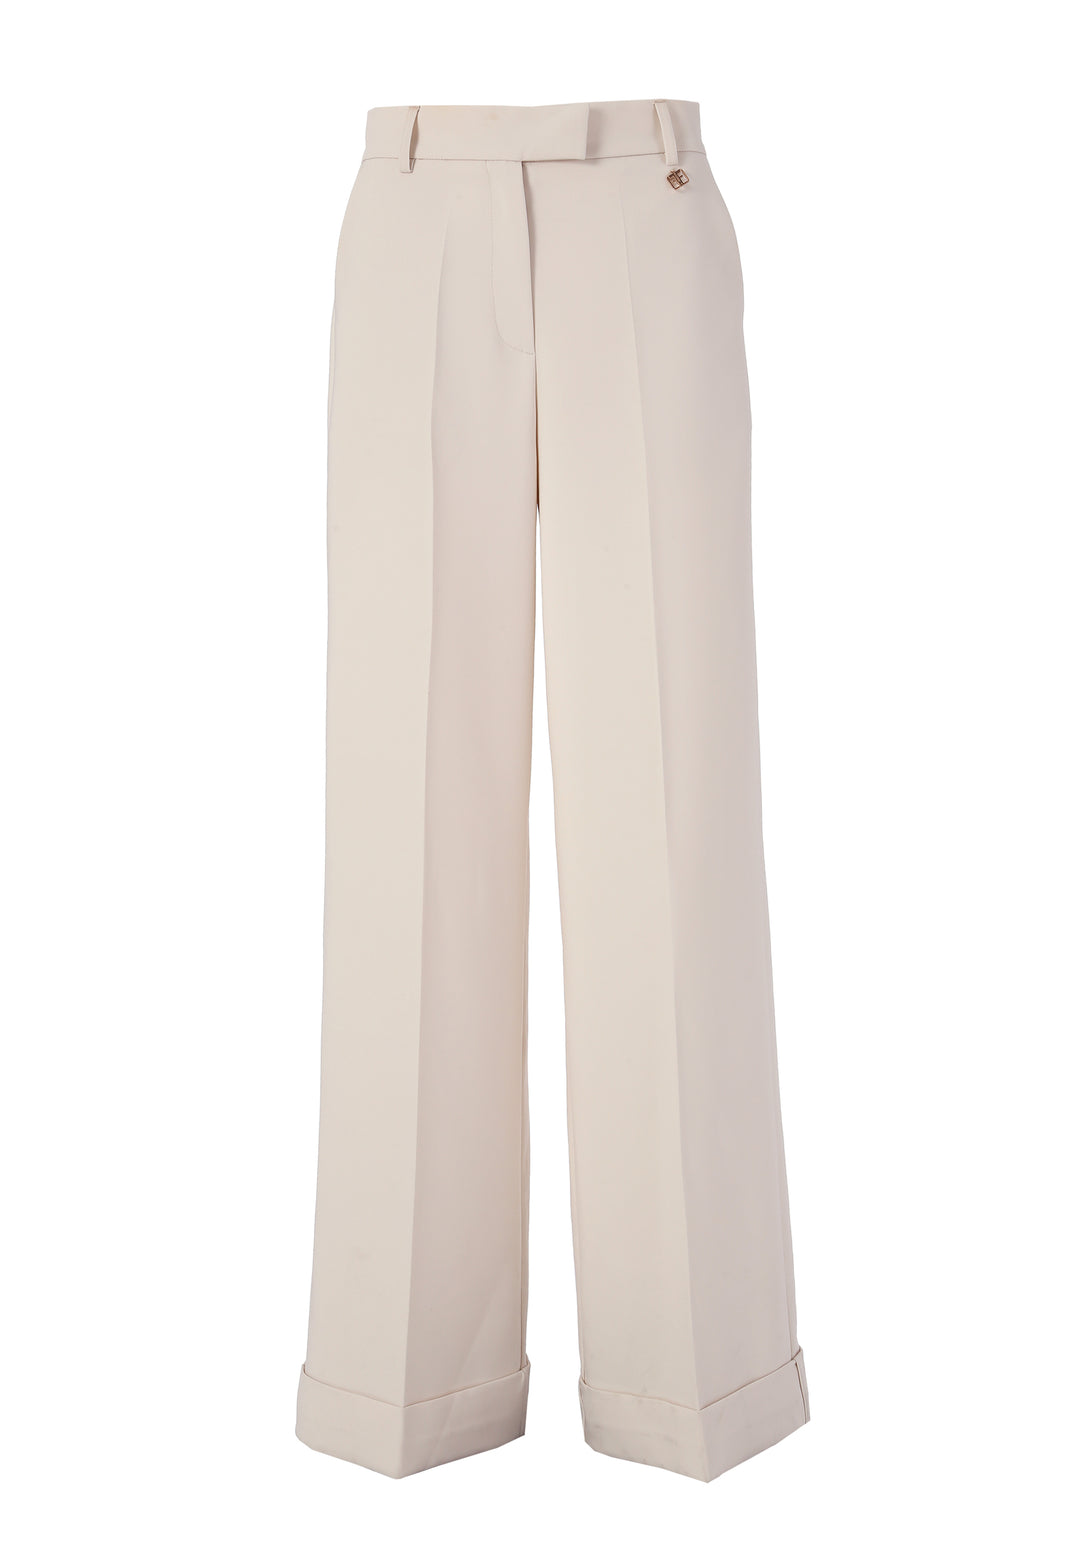 Palazzo pant flare made in technical fabric